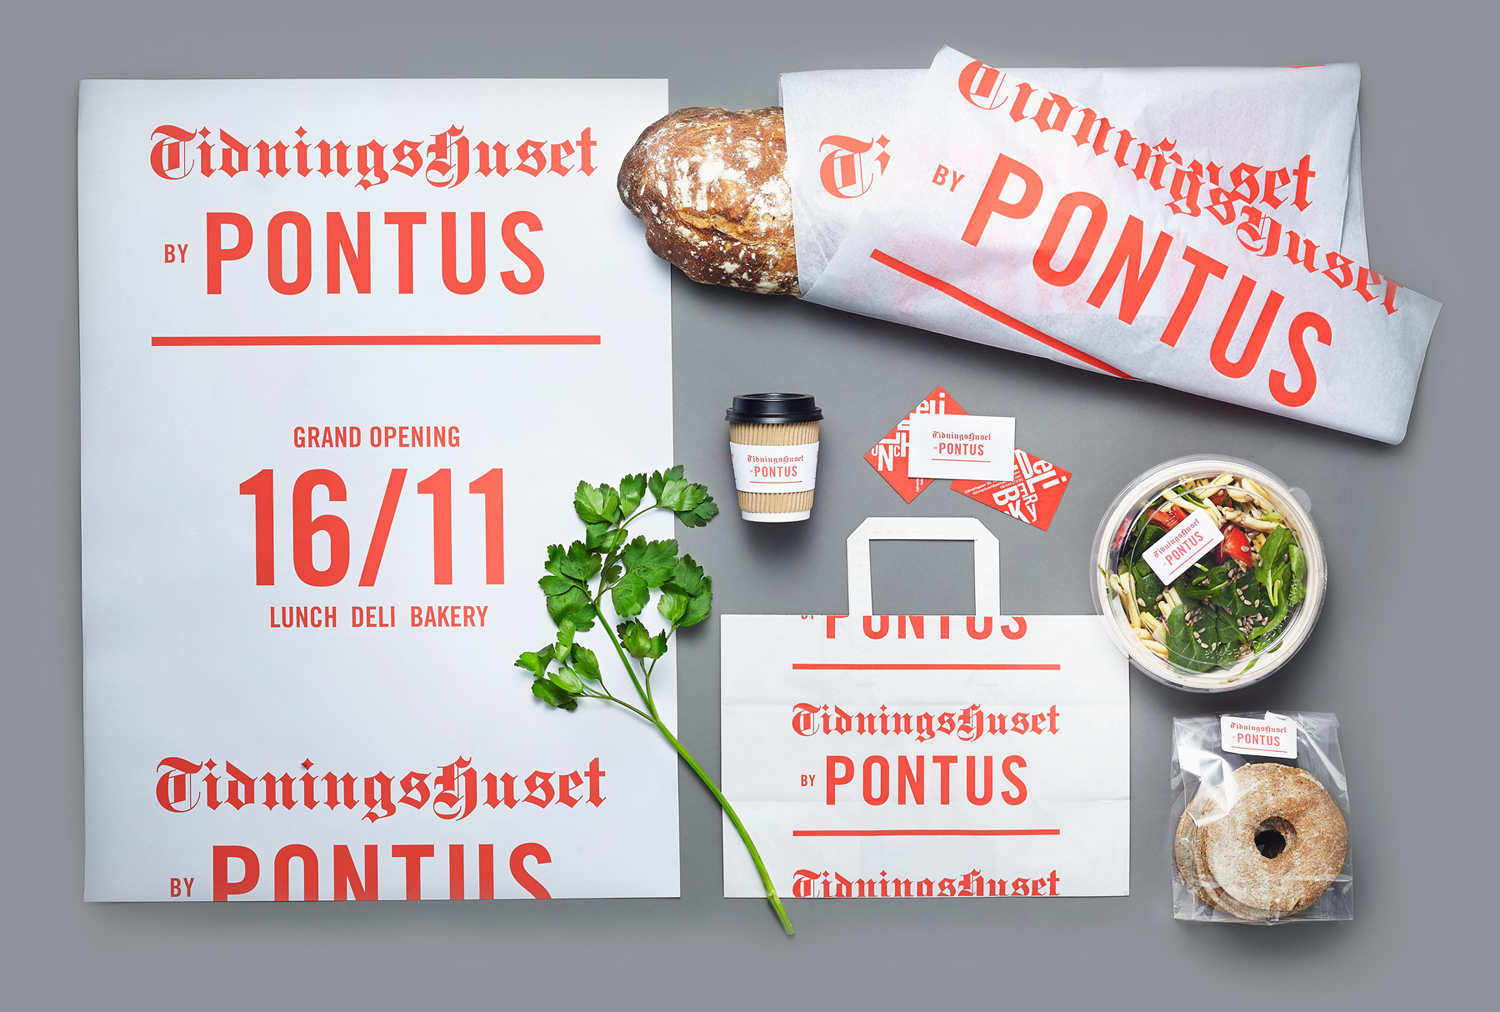 Brand identity, print and packaging for Stockholm lunch restaurant Tidningshuset by Pontus by Bold, Sweden